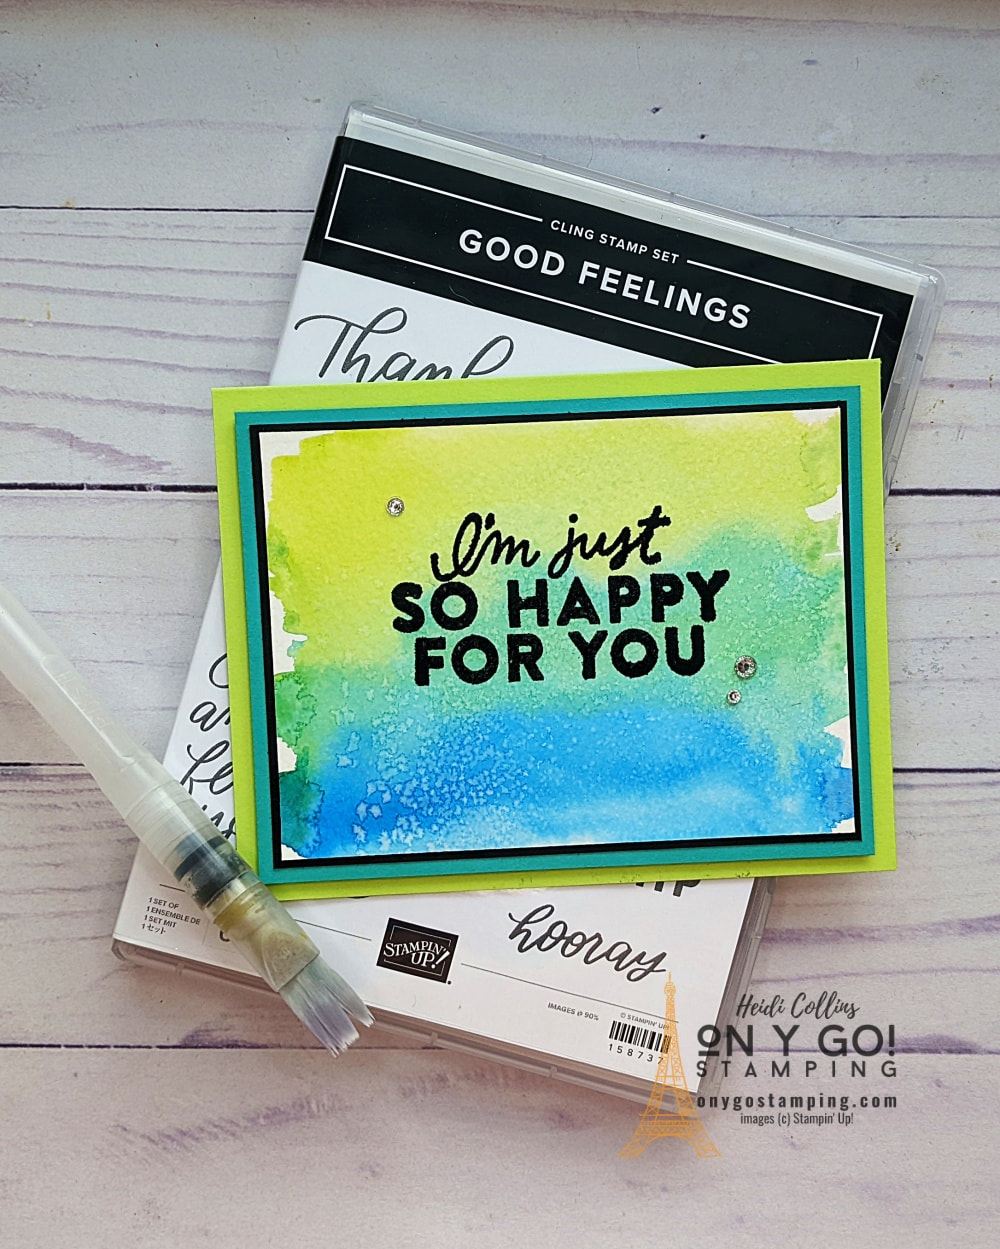 The Good Feelings stamp set from Stampin' Up!® works perfectly with watercolor backgrounds to create easy handmade cards.